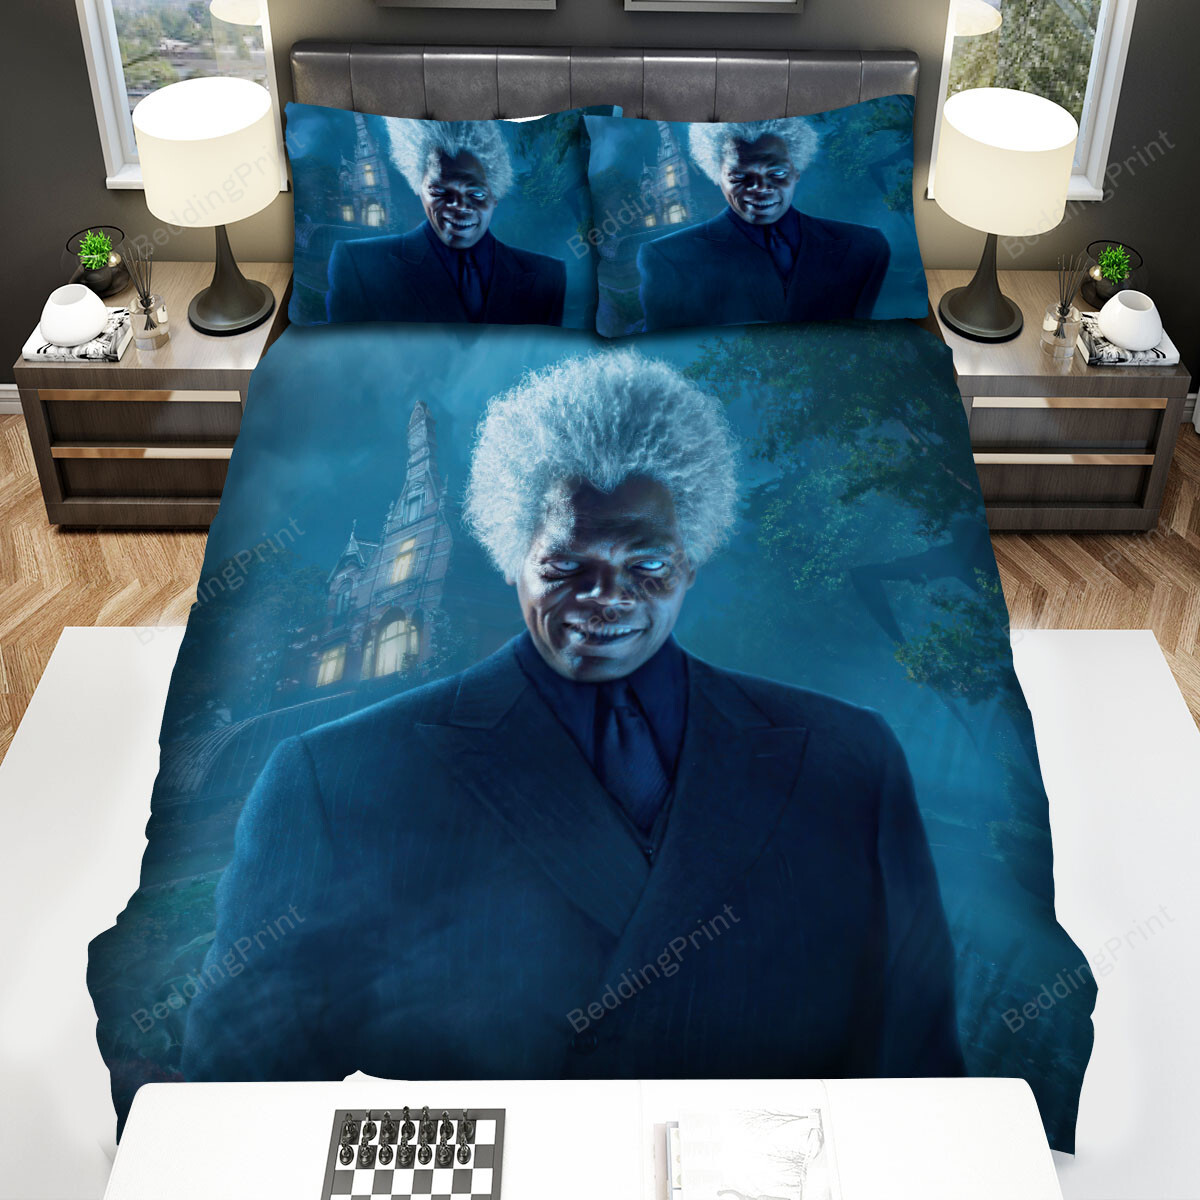 Miss Peregrine's Home For Peculiar Children (2016) Barron Poster Bed Sheets Spread Comforter Duvet Cover Bedding Sets